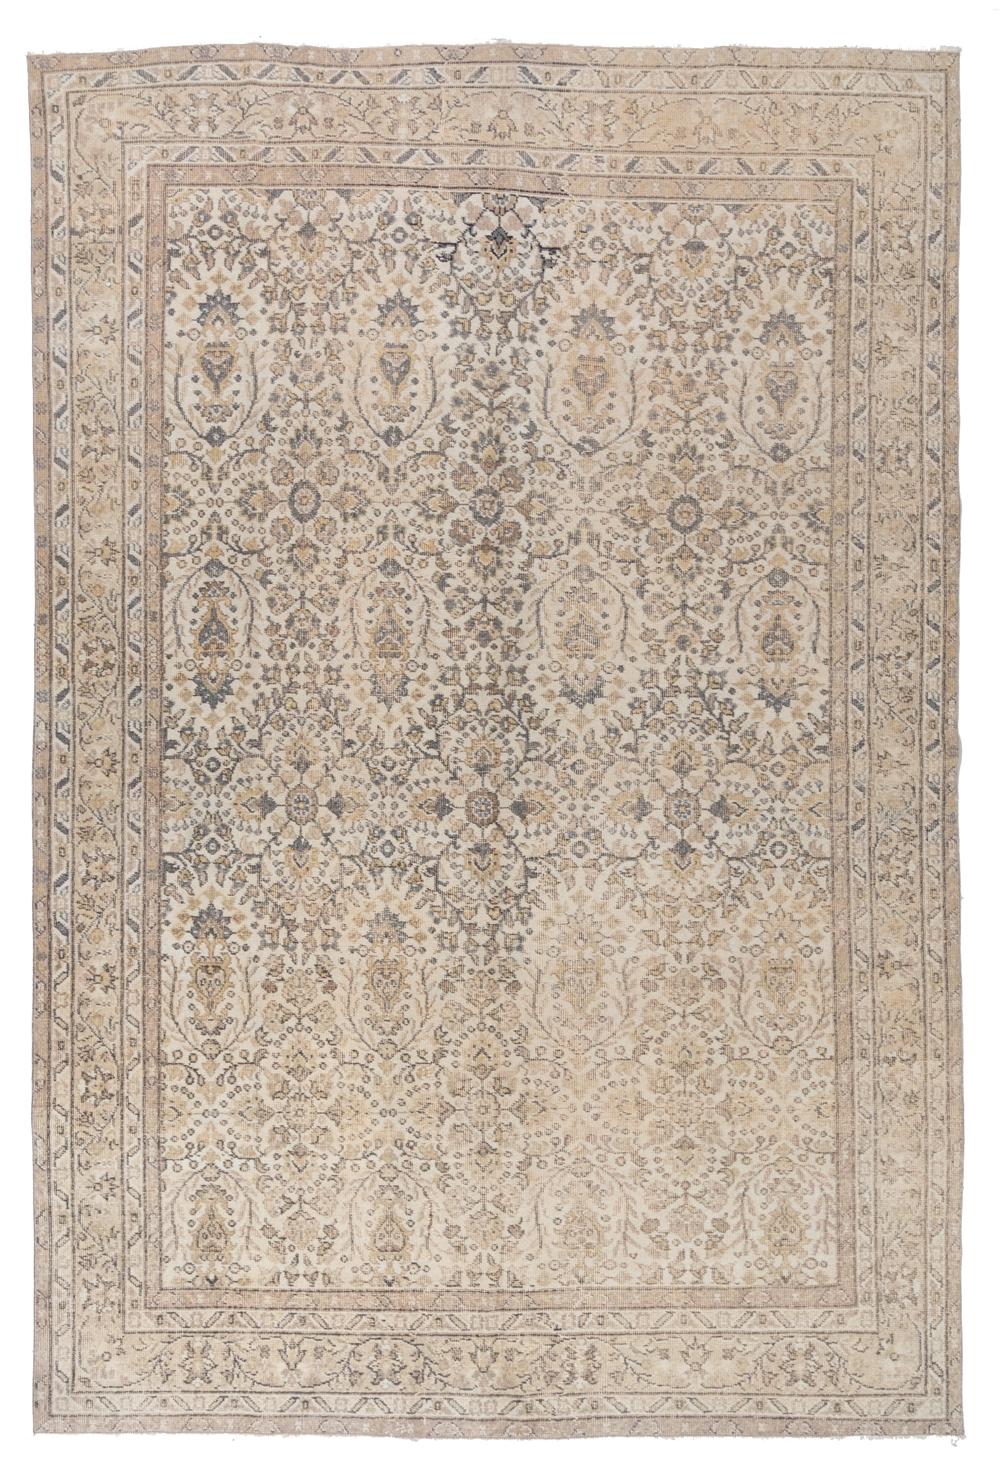 Age: 1940

Pile: low

Wear Notes: 3

Material: wool on cotton

Wear Guide:
Vintage and antique rugs are by nature, pre-loved and may show evidence of their past. There are varying degrees of wear to vintage rugs; some show very little and some show